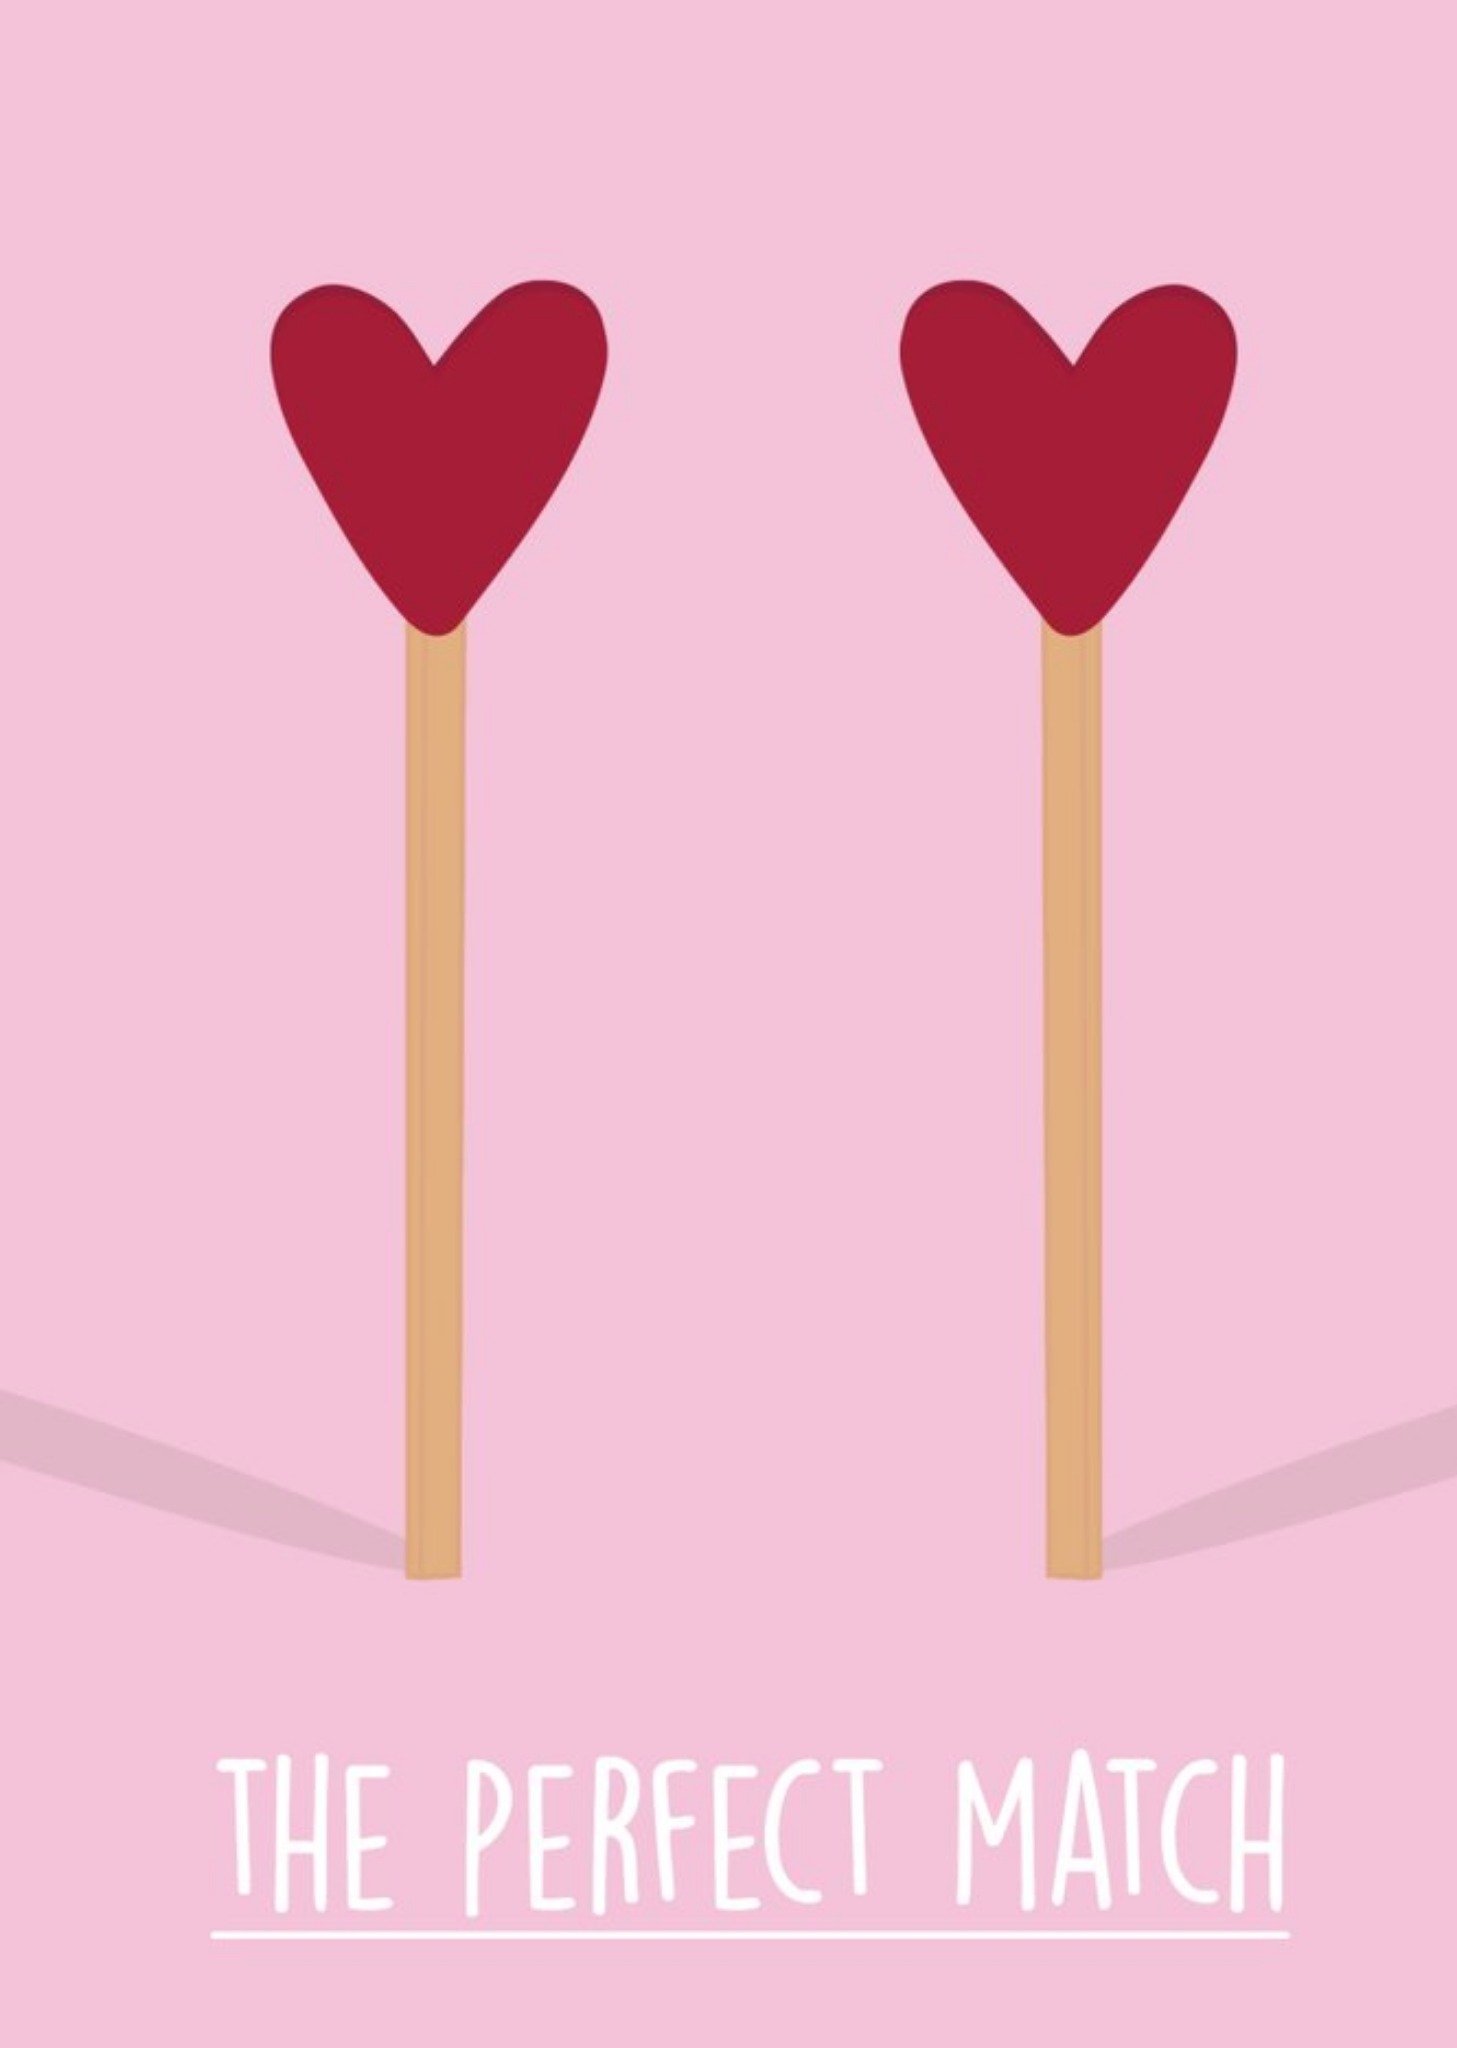 Rumble Cards The Perfect Match Heart Matchsticks Valentines Day Card Ecard